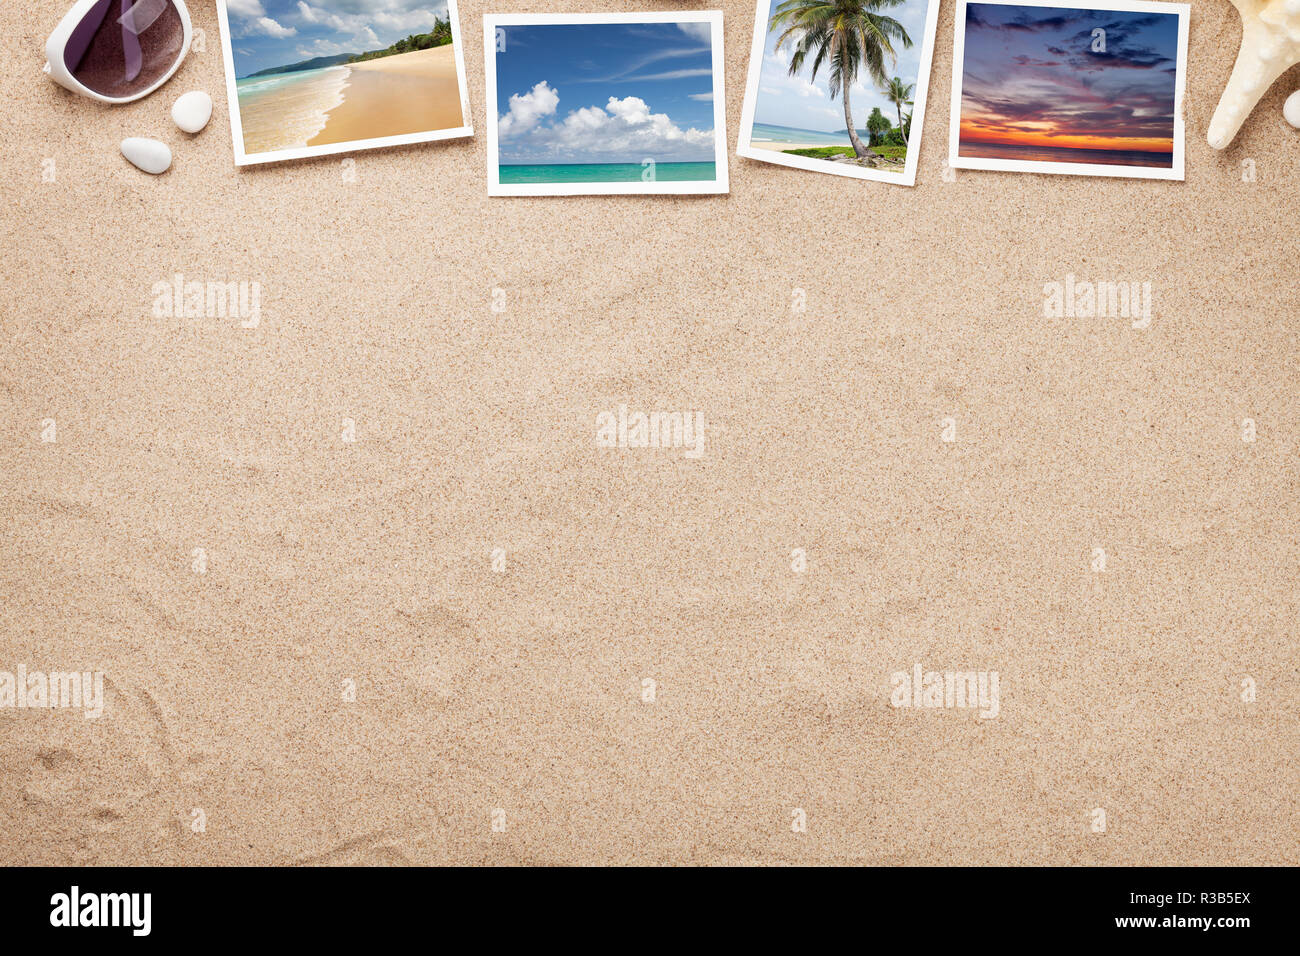 Travel vacation background concept with sunglasses, seashells and photos on sand backdrop. Top view with copy space. Flat lay. All photos taken by me Stock Photo